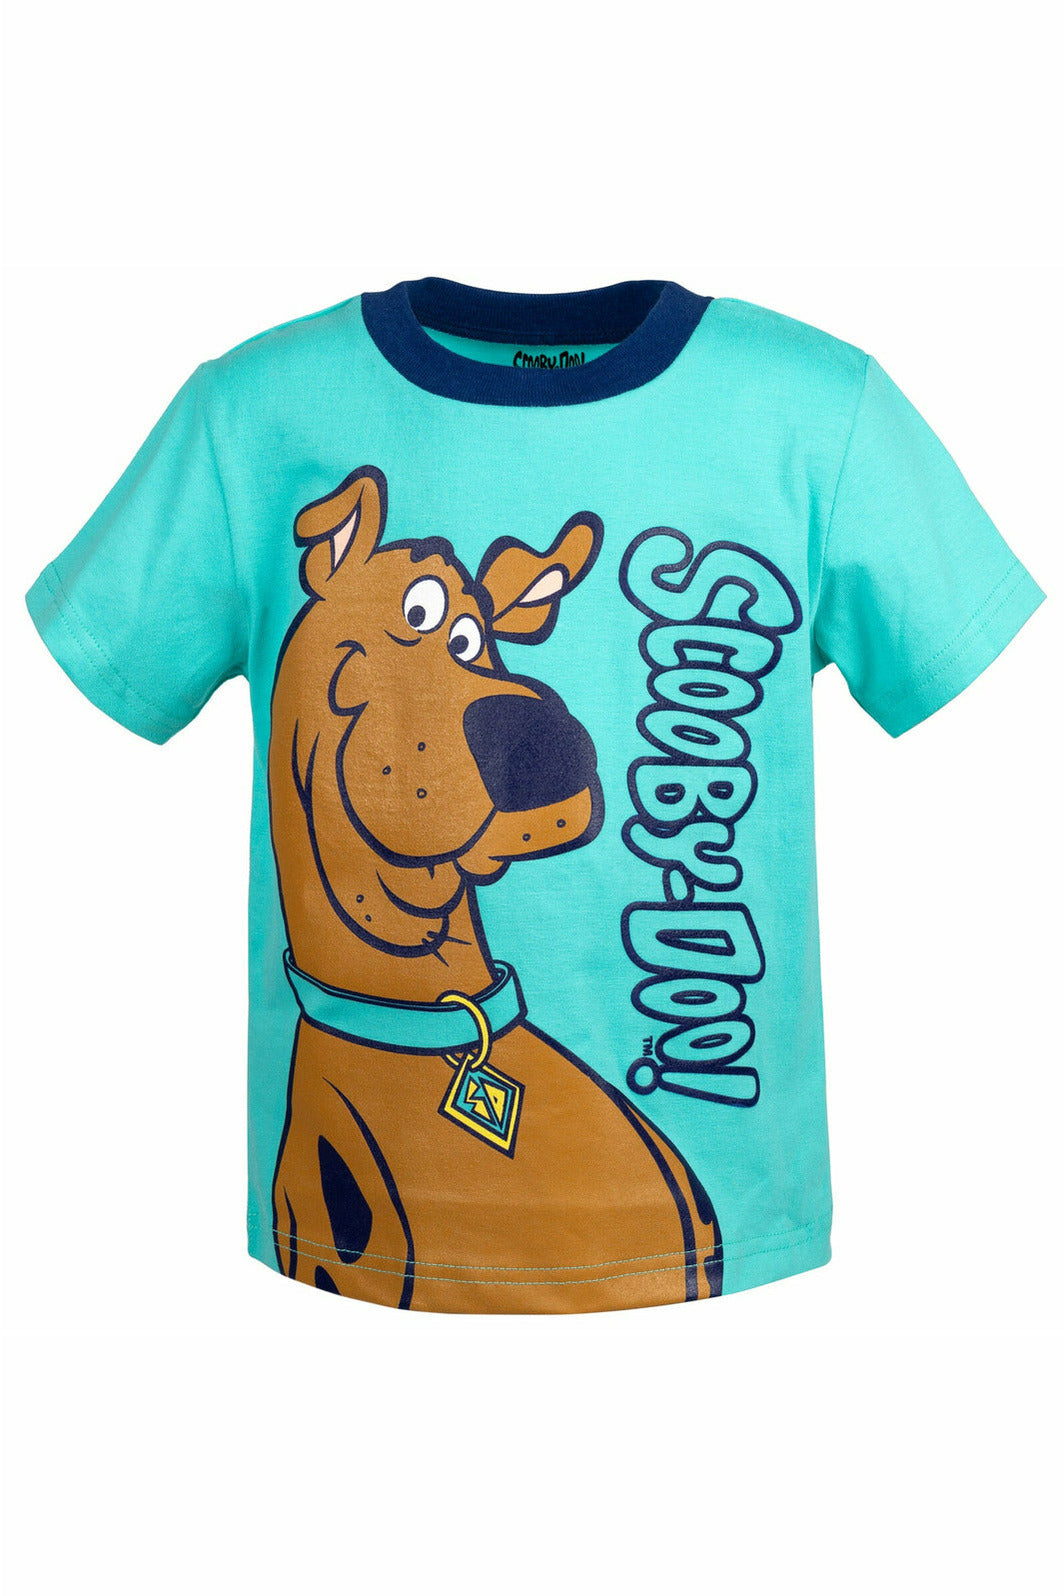 Warner Bros. Scooby Doo Graphic T-Shirt & French Terry Shorts